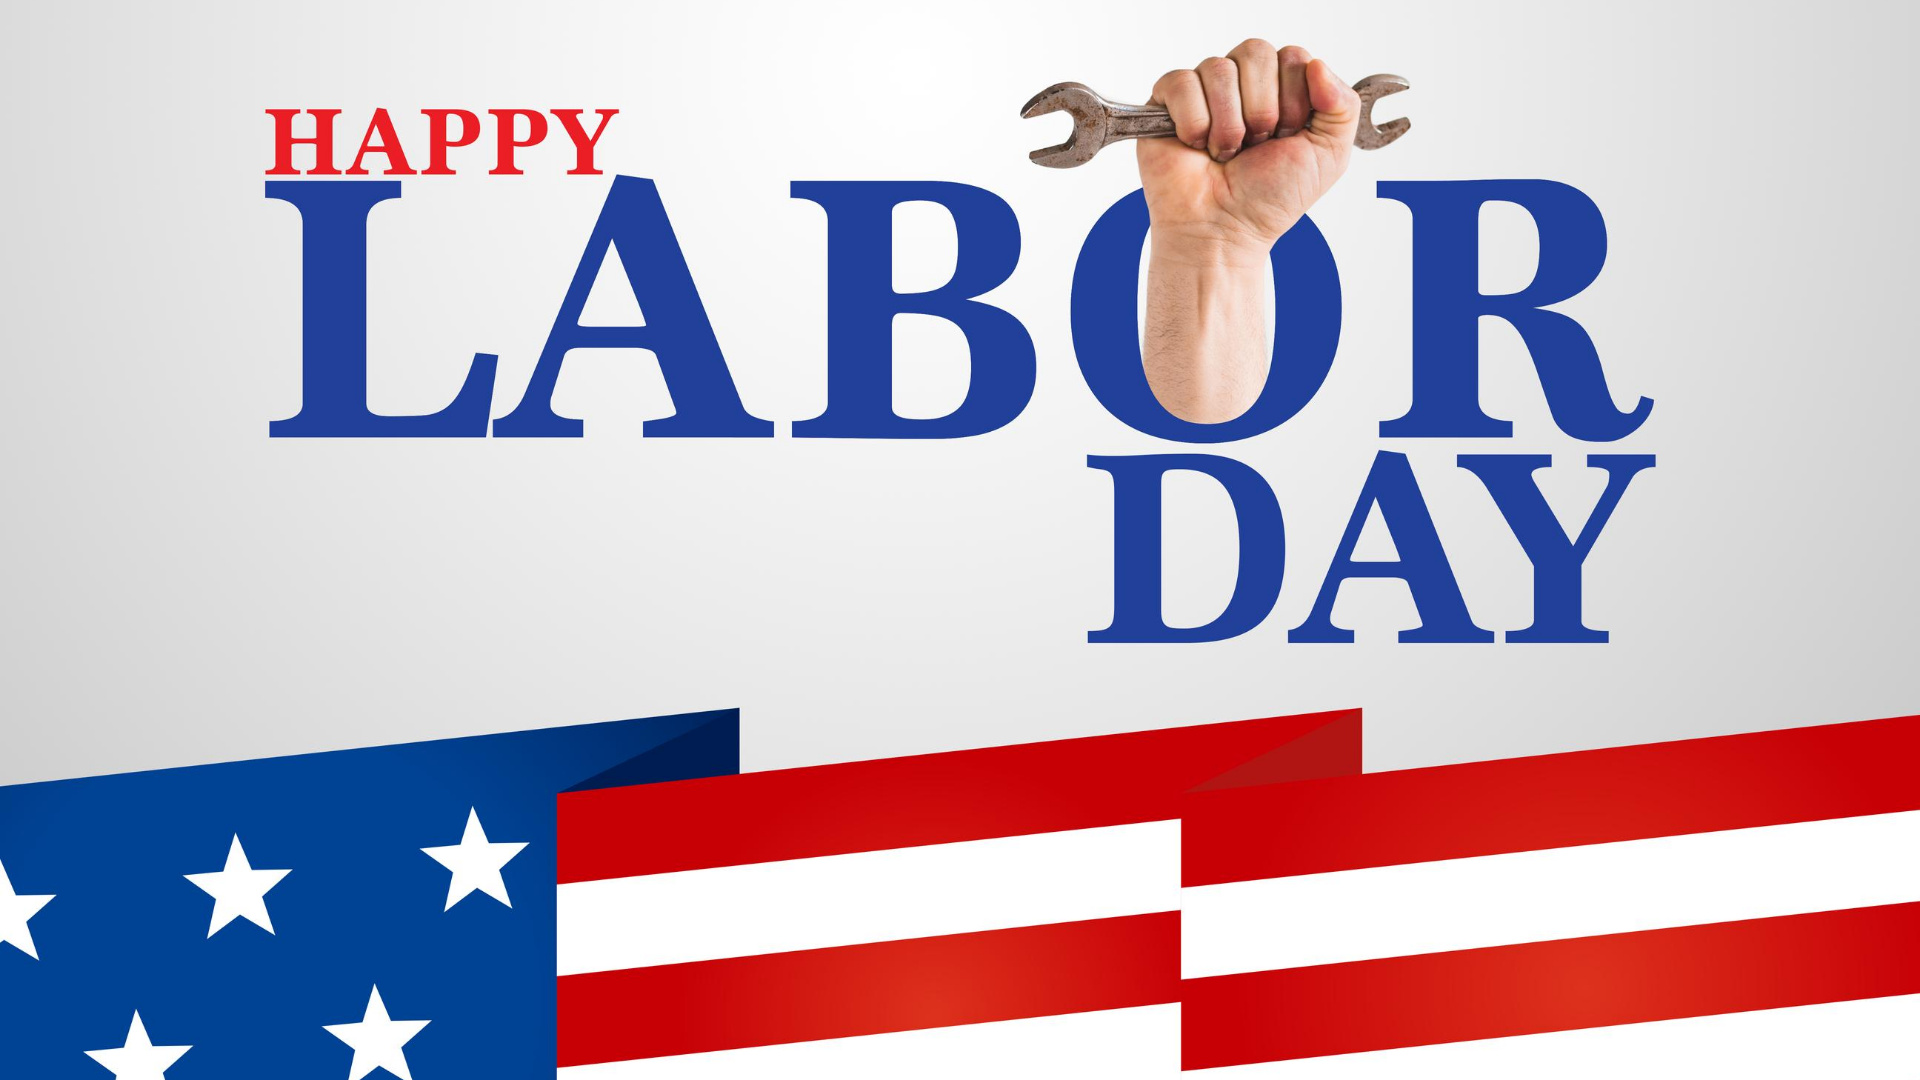 Labor Day Holiday, Labor day 2020, Liquor stores open, Parking free, 1920x1080 Full HD Desktop